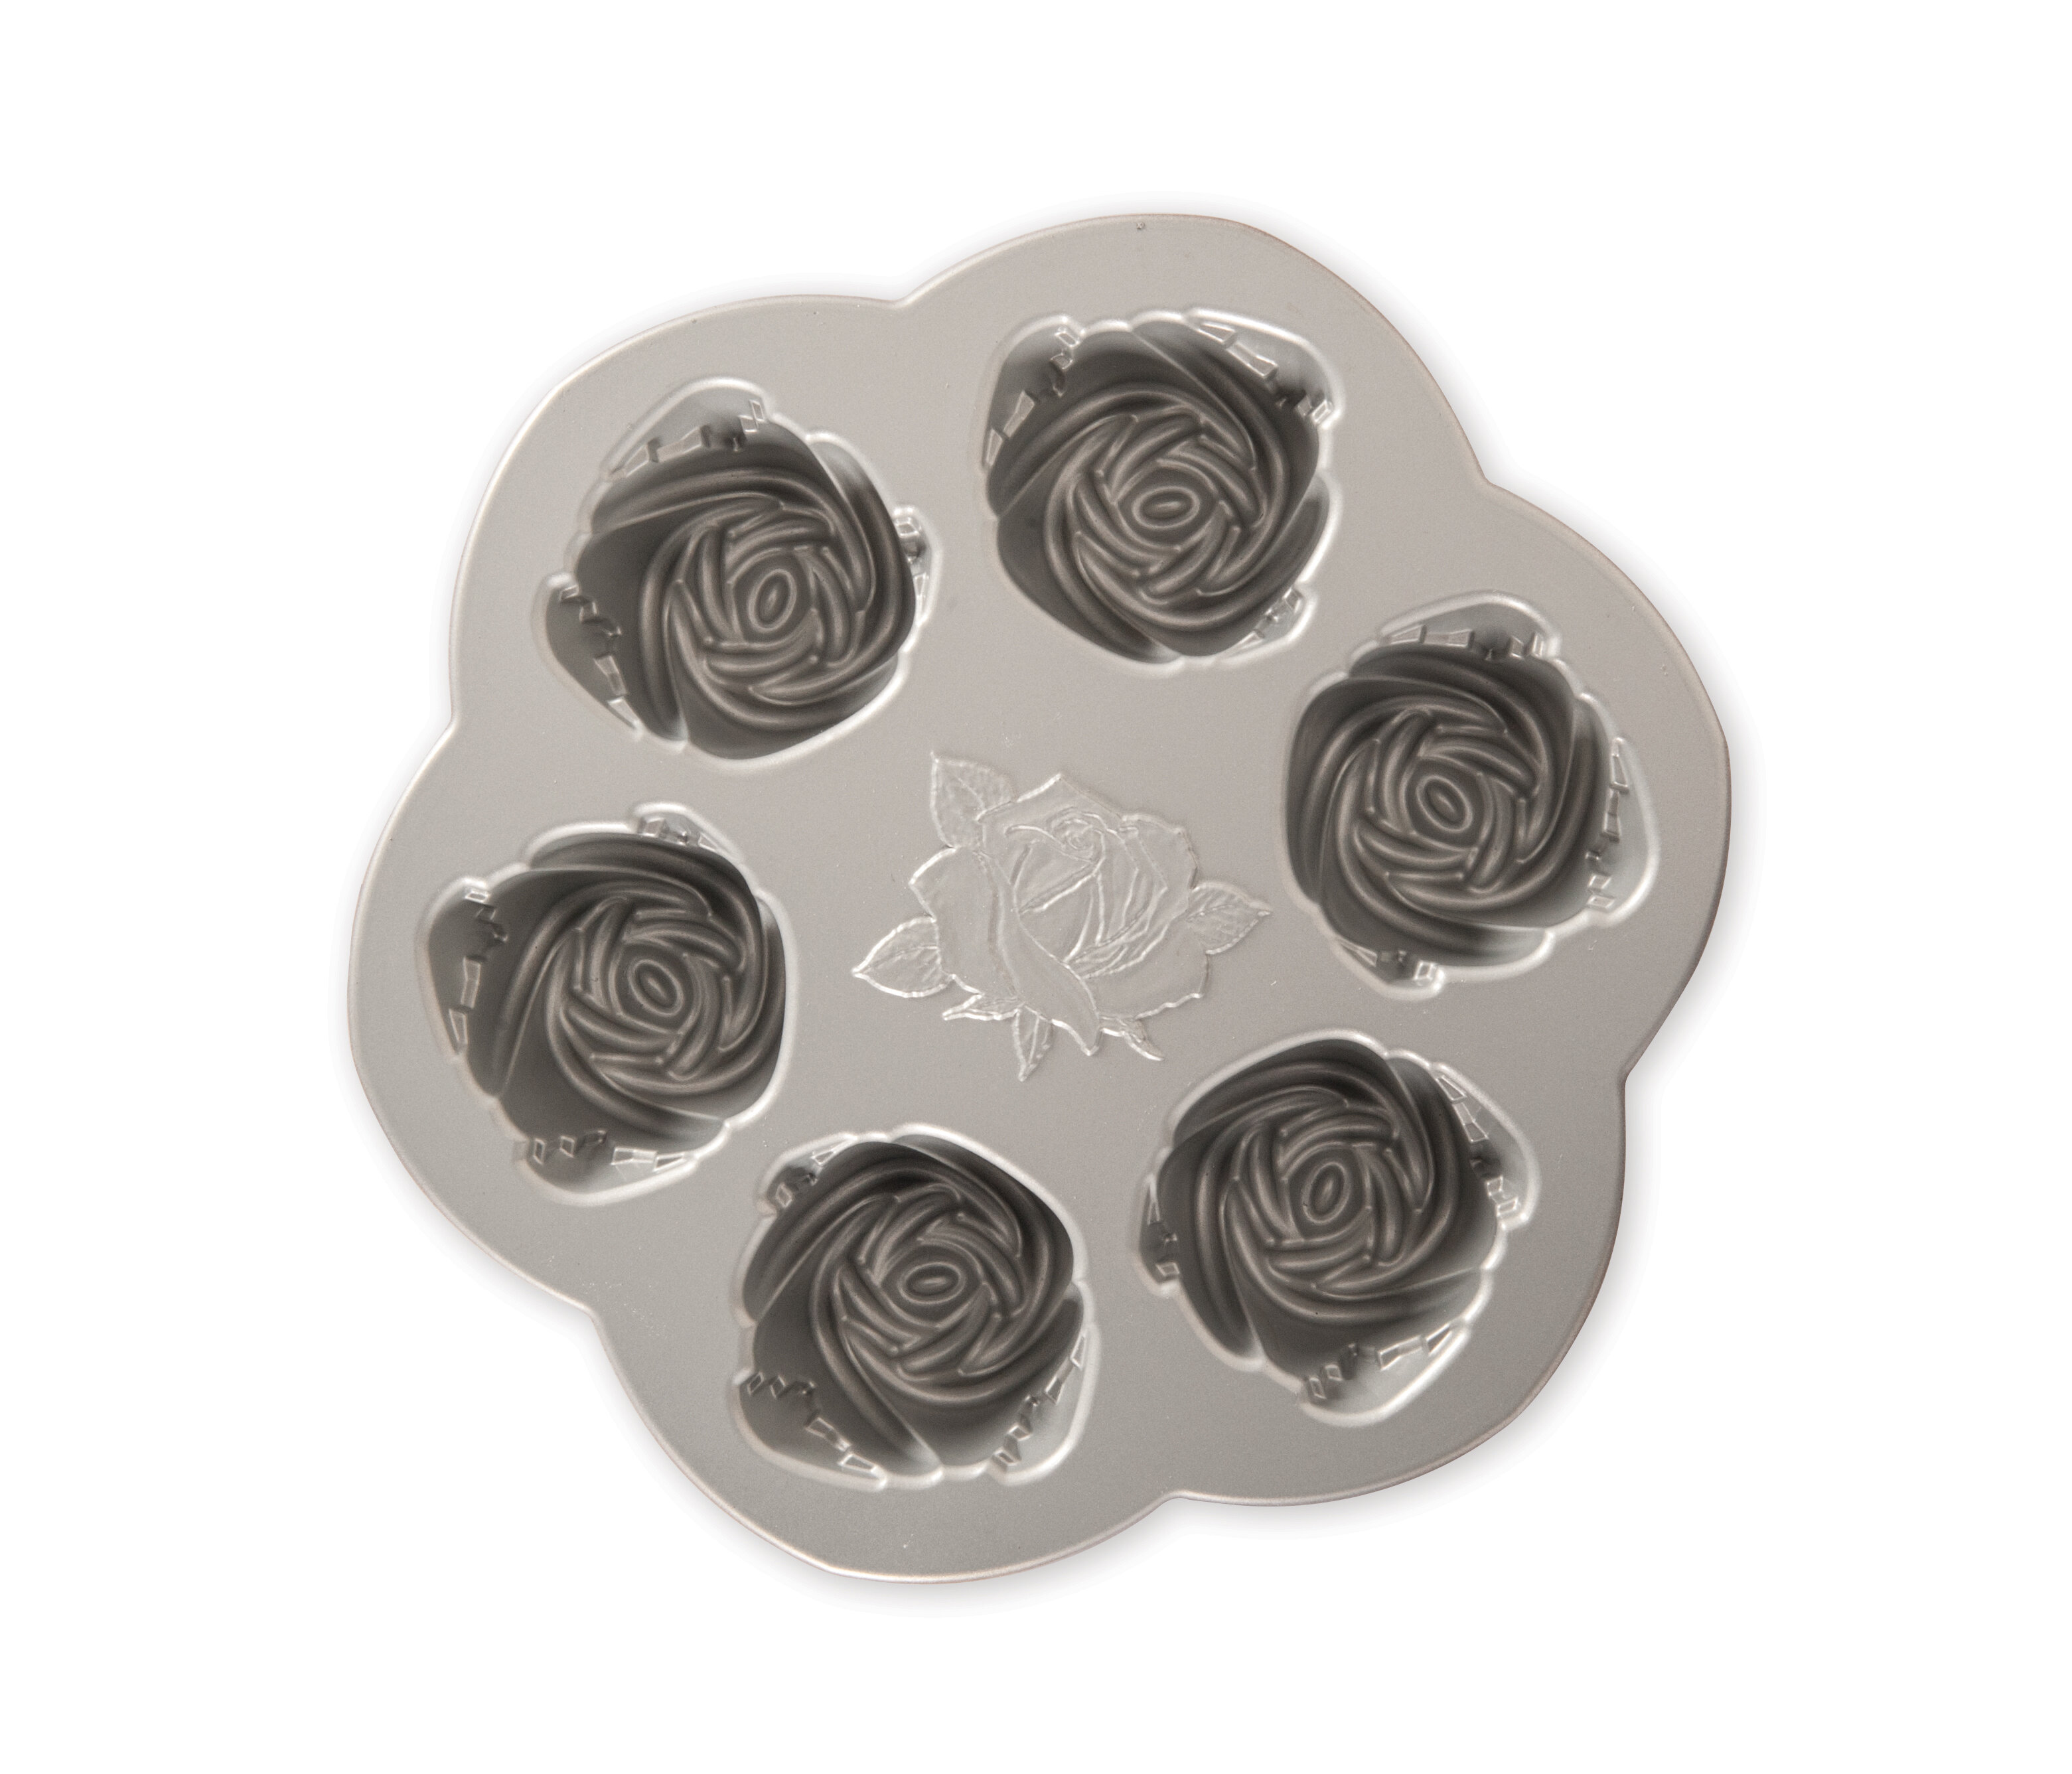 Including Mini Cupcake Silicone Baking Pan, Small Muffin Cups, Baby Chiffon  And Cupcake Molds, Non-stick Bakeware